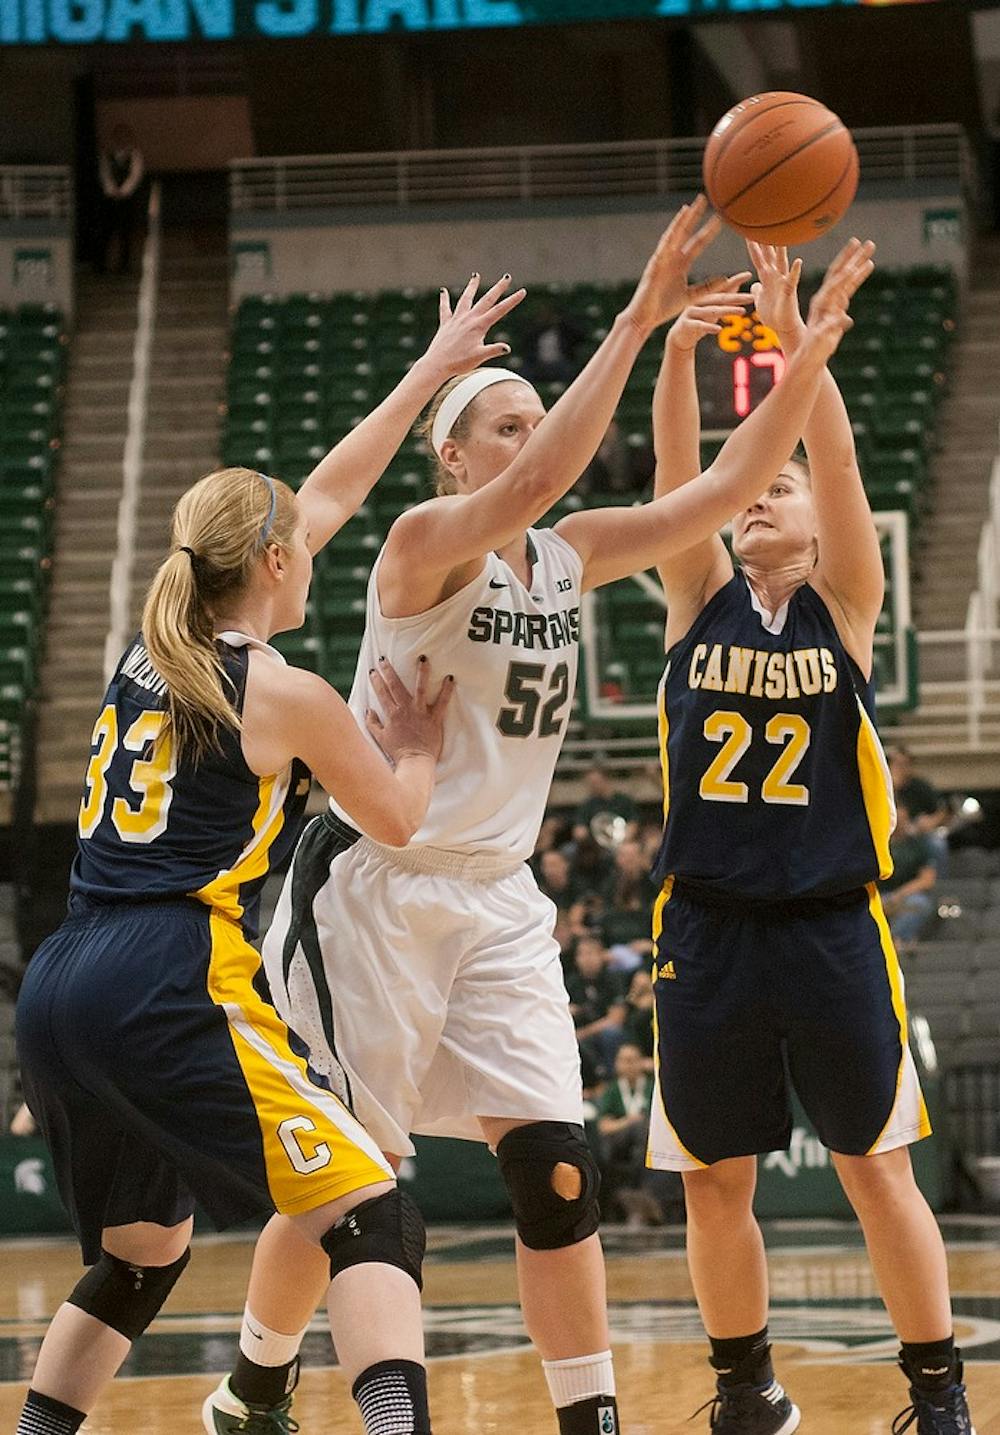 	<p>Junior forward Becca Mills takes a shot around Canisius forward Courtney VandeBovenkamp, 33, and guard Tamara Miskovic, 22, during the game Nov. 14, 2013, at Breslin Center. <span class="caps">MSU</span> defeated Canisius 102-54. Brian Palmer/The State News</p>